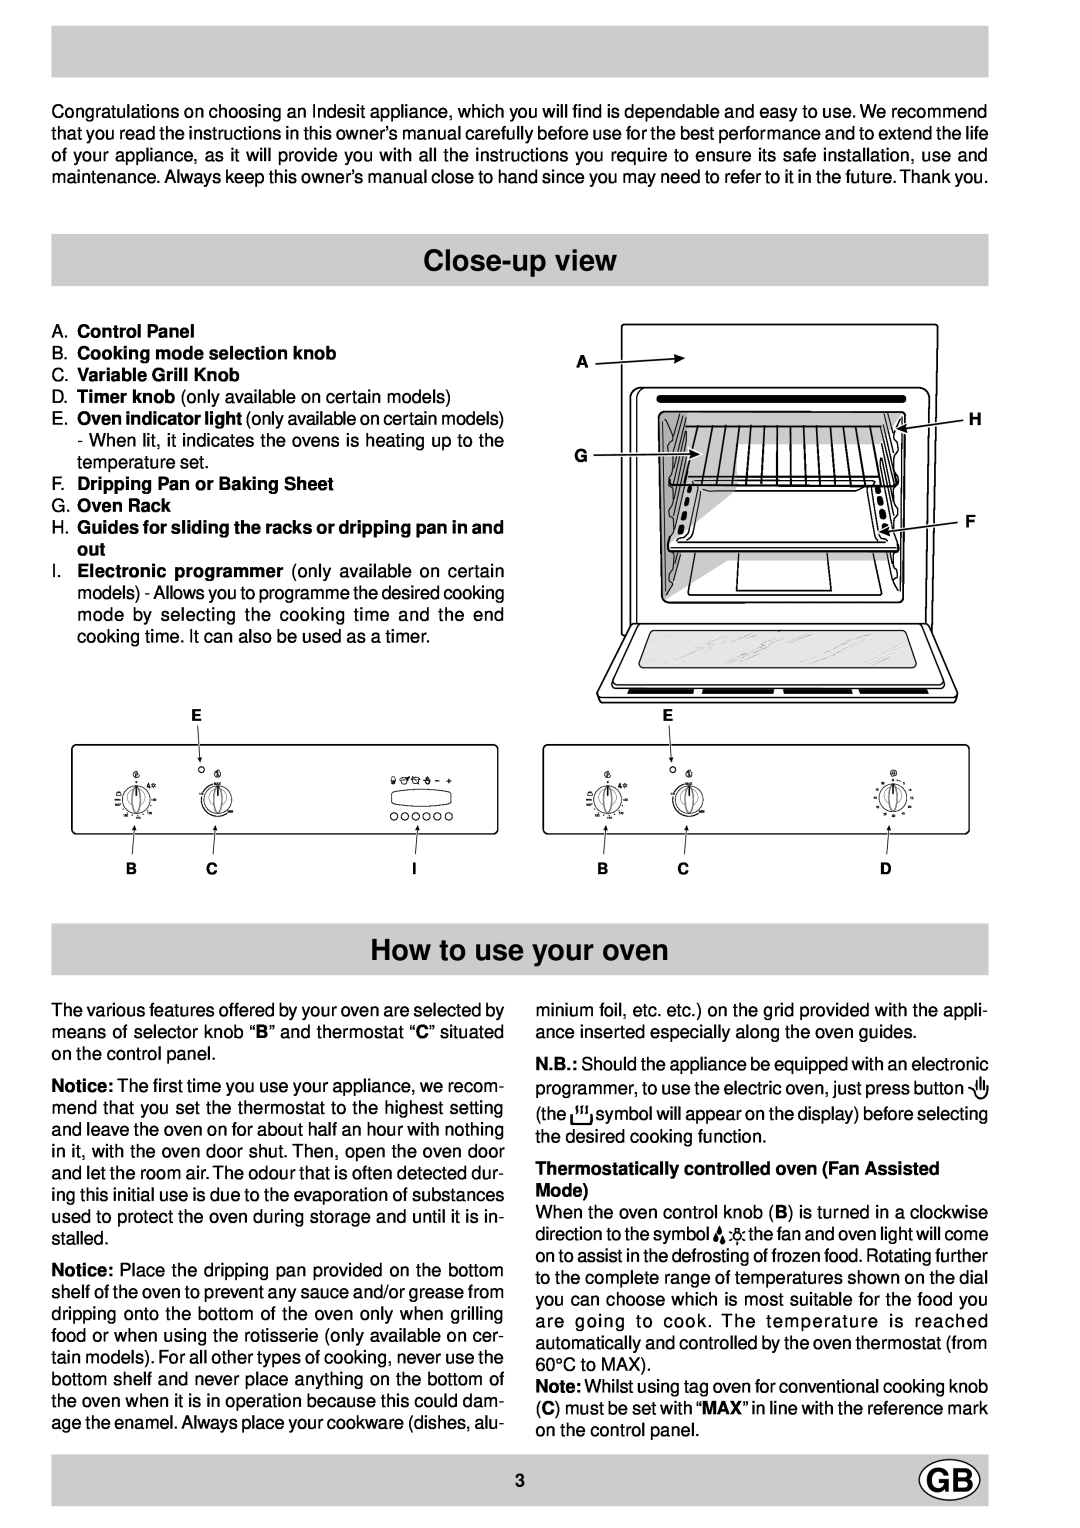 Indesit FV 10 K.B IX GB Close-up view, How to use your oven, A. Control Panel B. Cooking mode selection knob, A H G F 